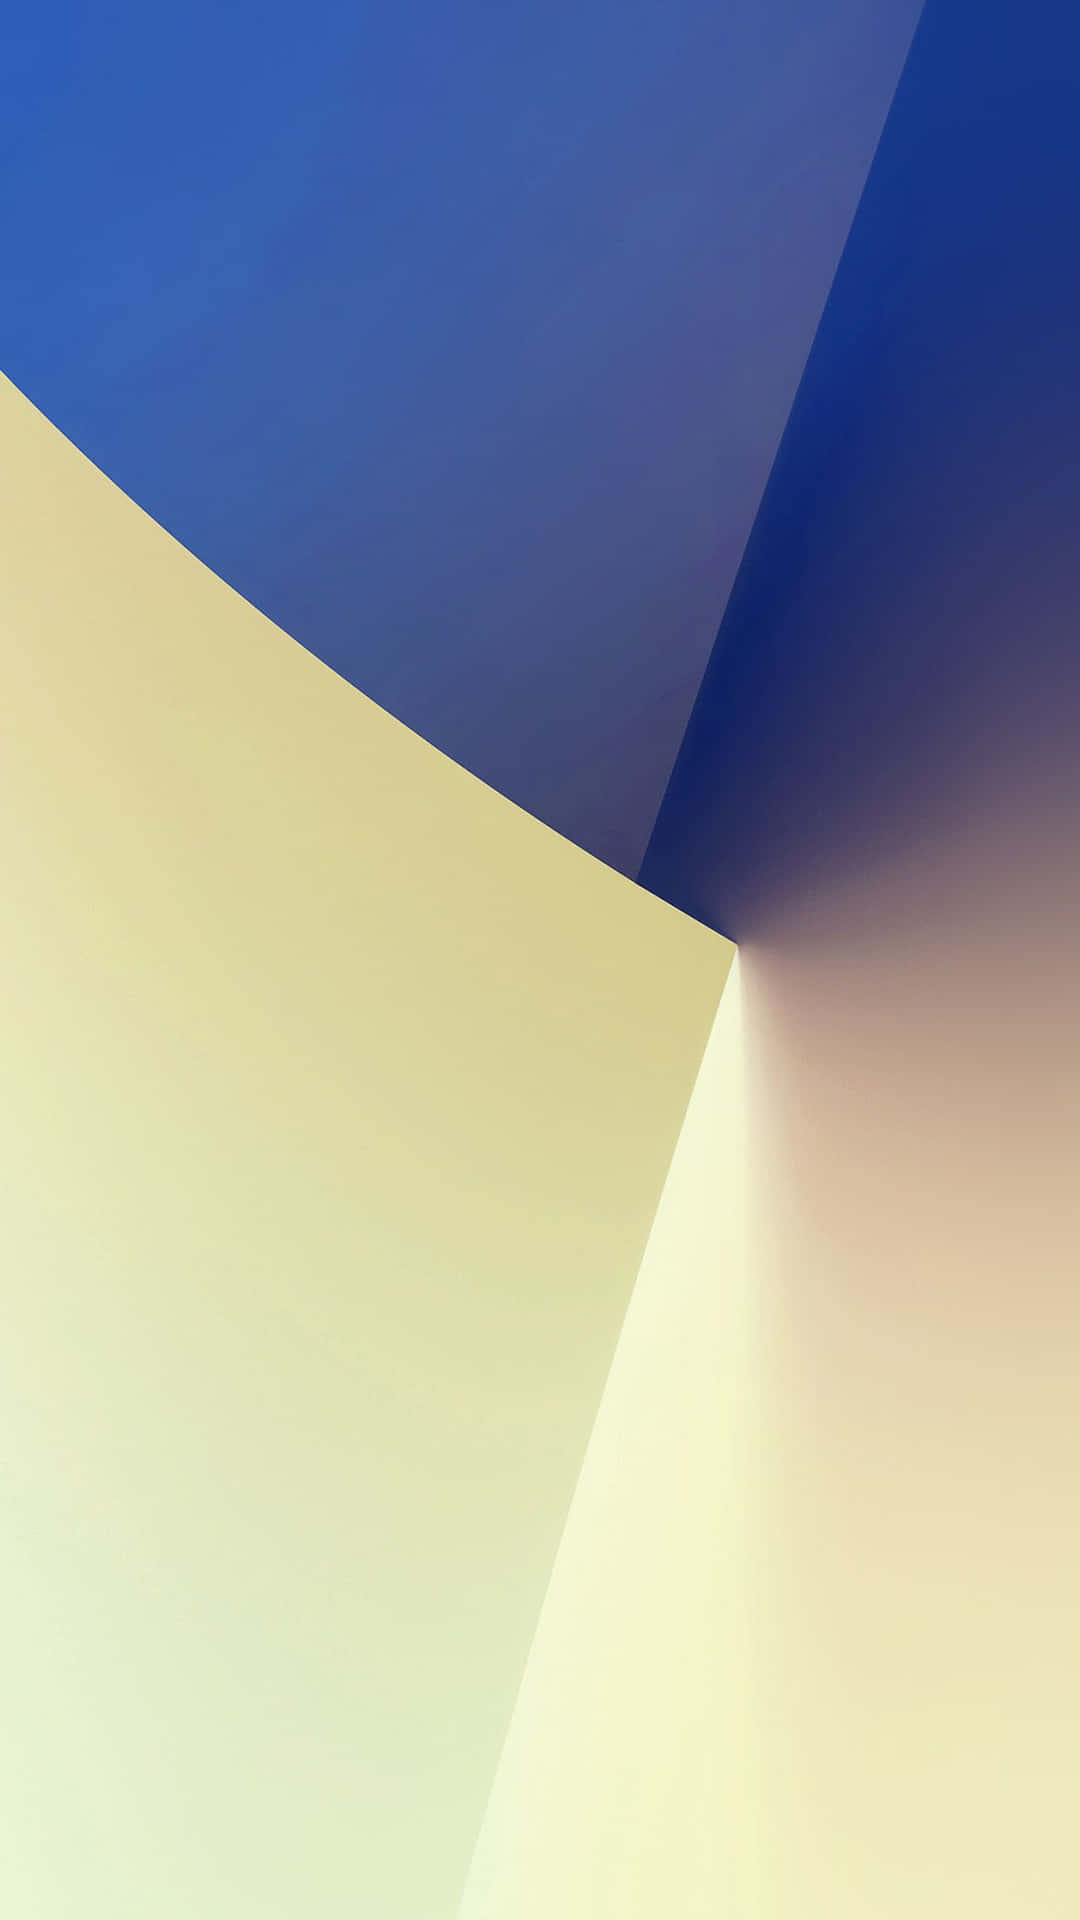 Check out this sleek and modern Simple Blue Iphone Wallpaper